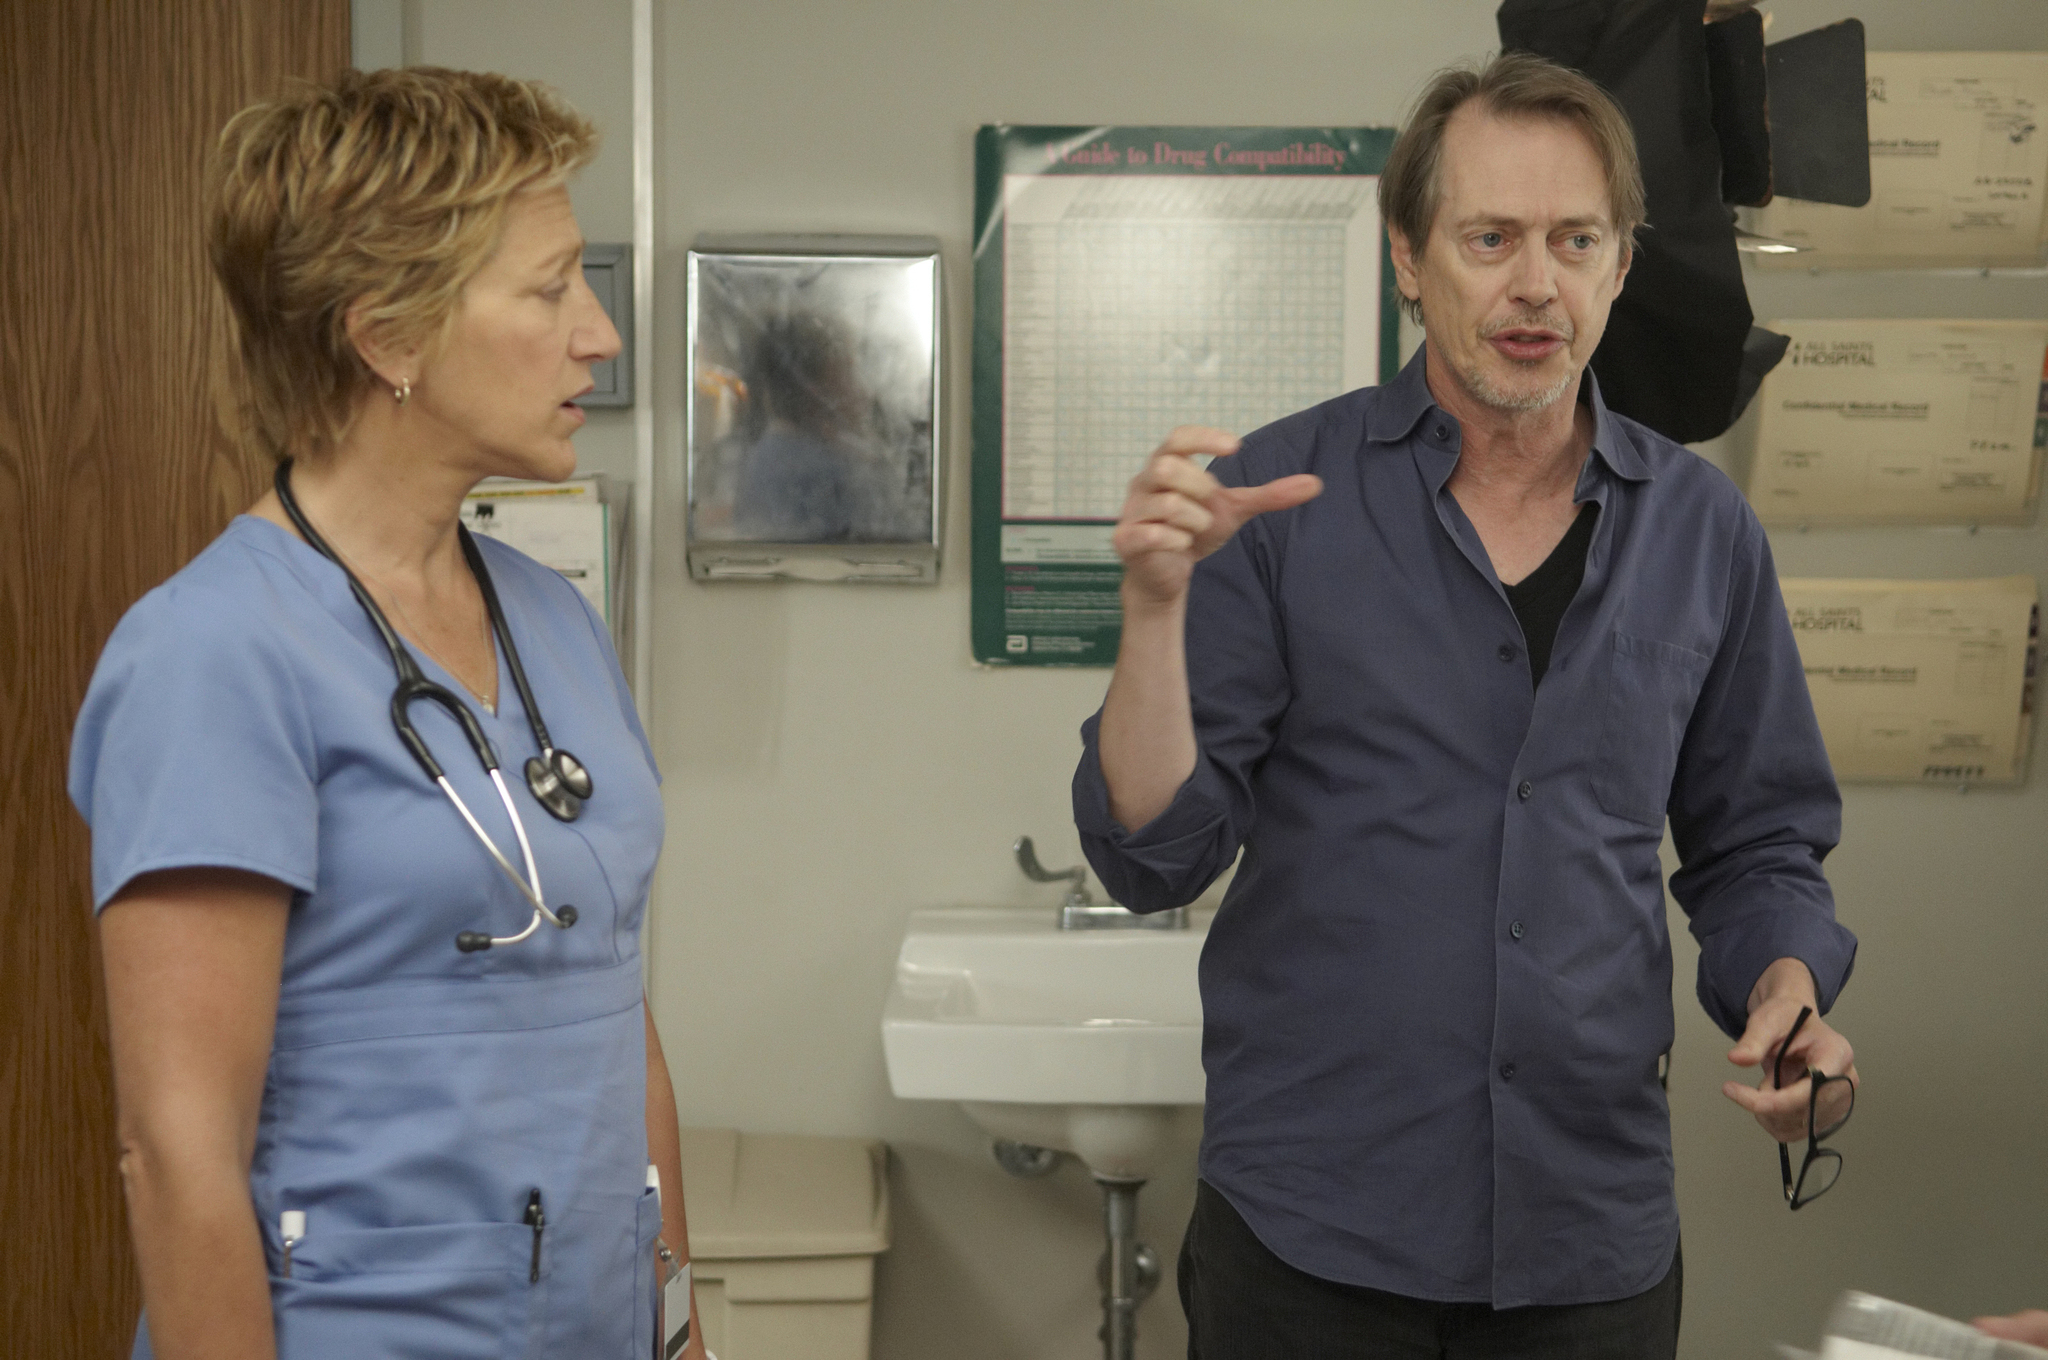 Still of Steve Buscemi and Edie Falco in Nurse Jackie (2009)